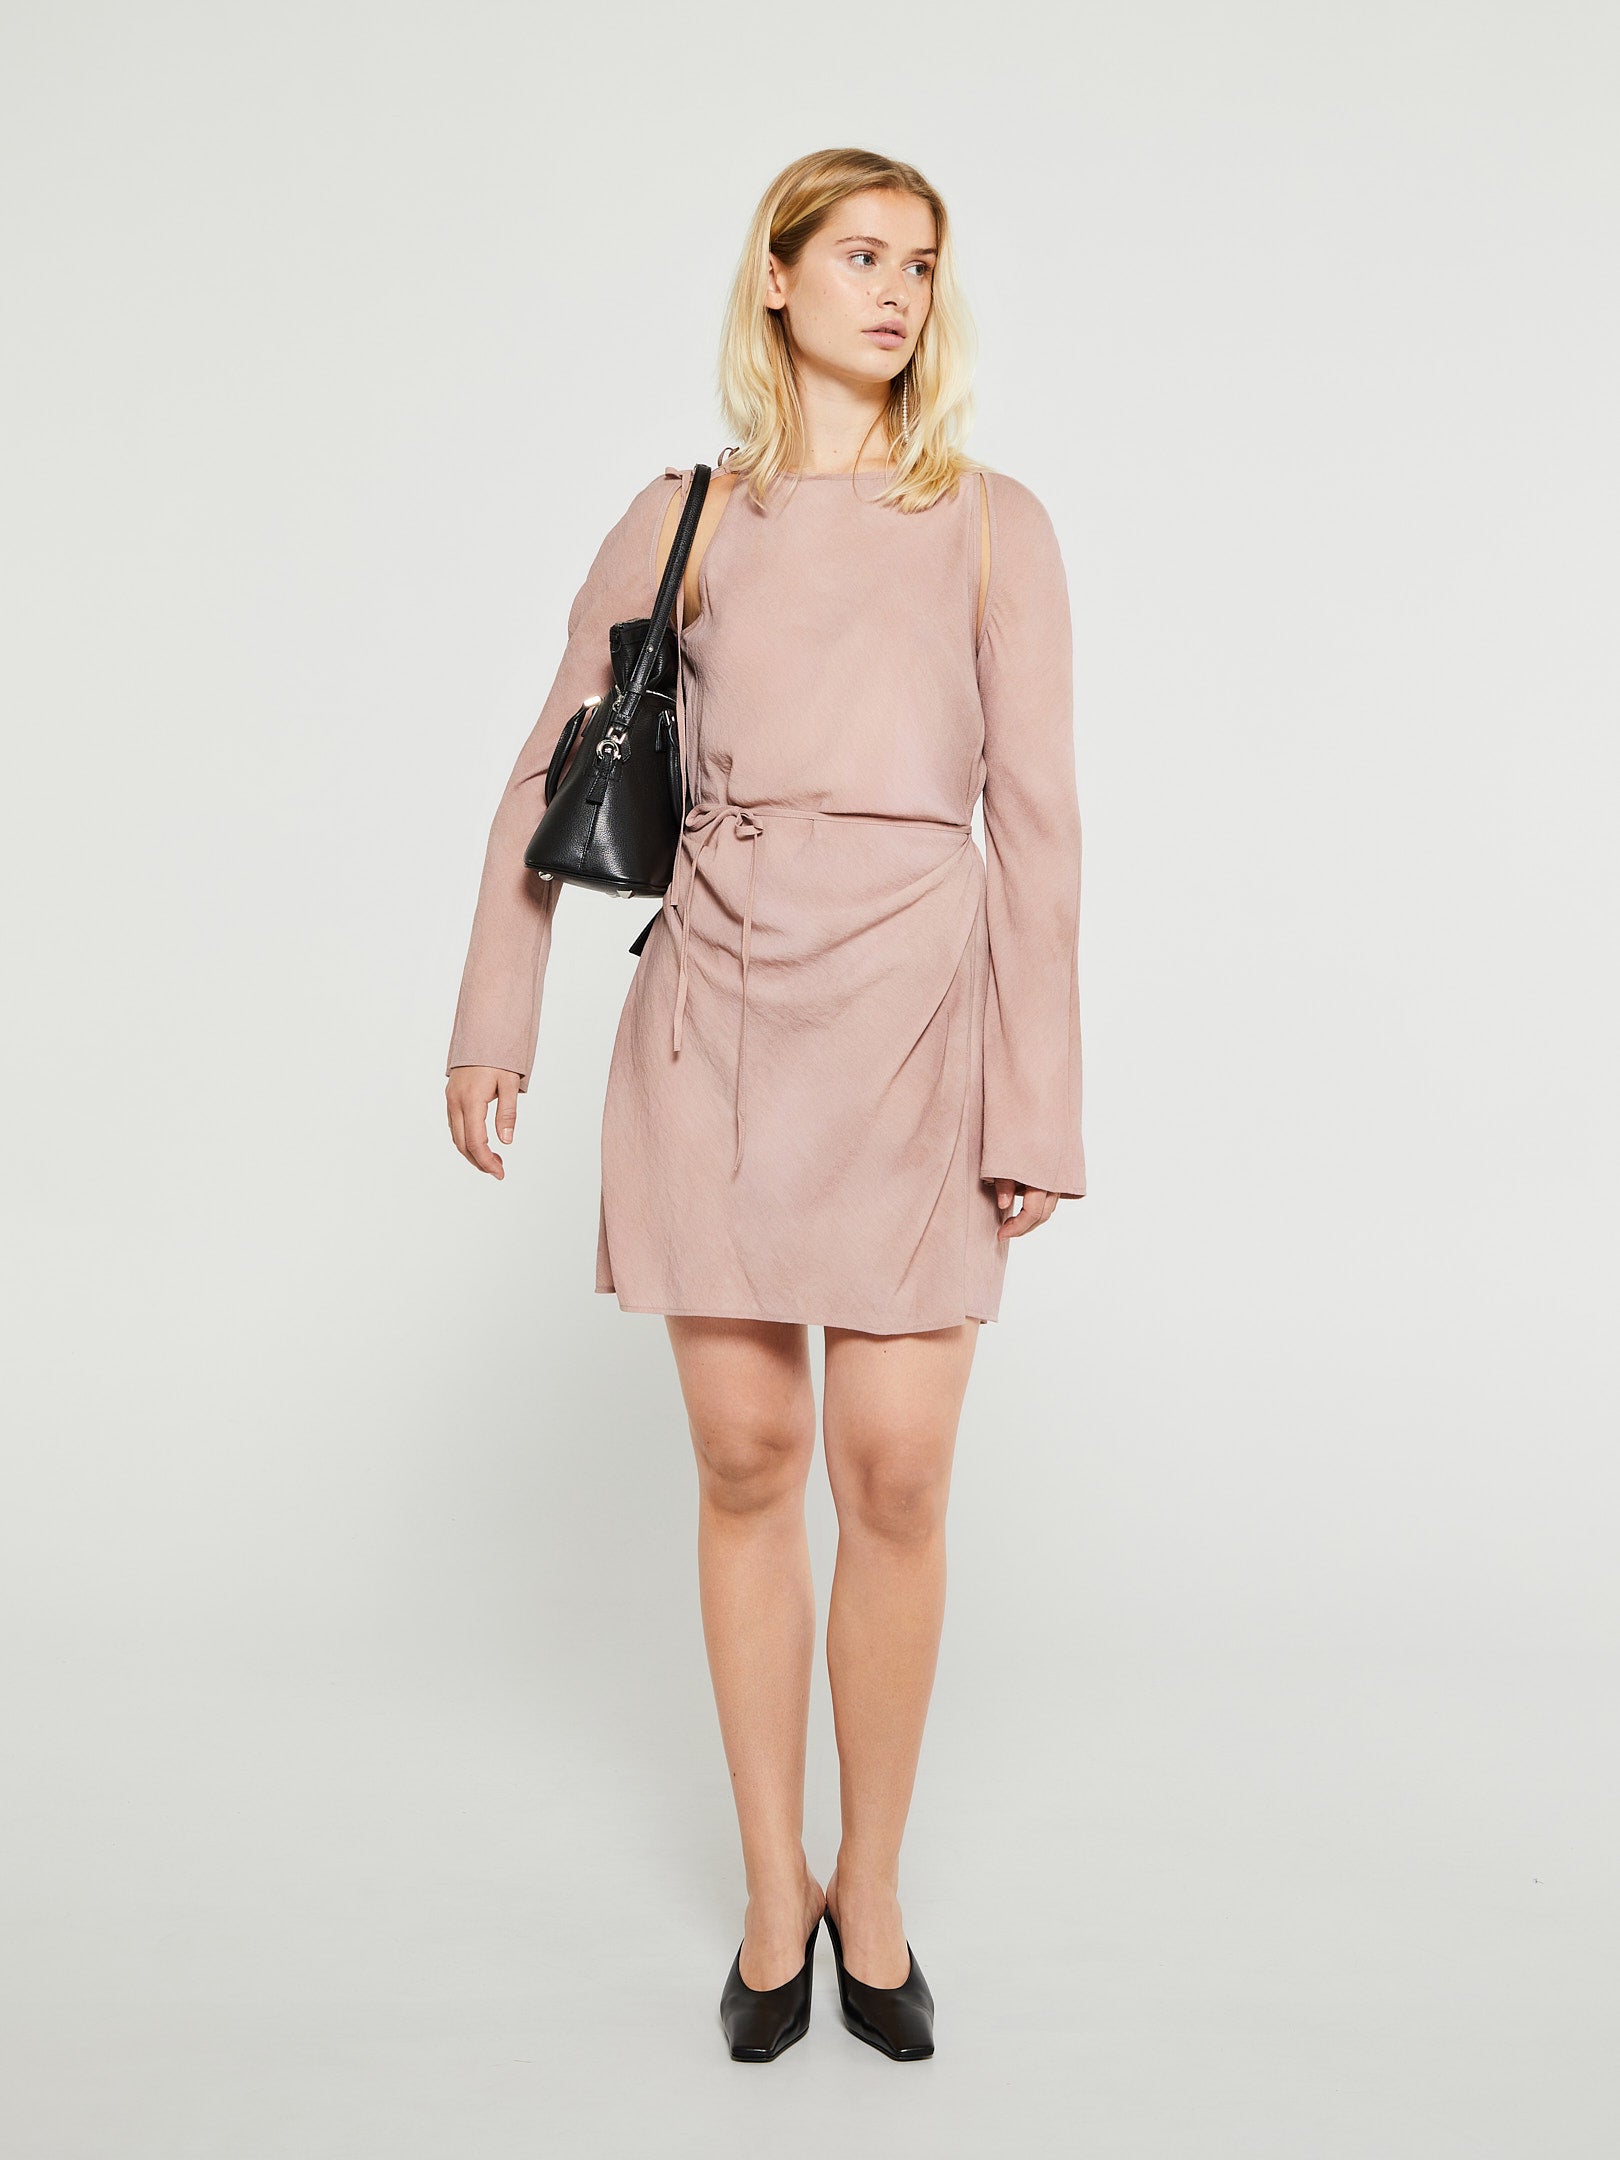 Dress in Mauve Pink